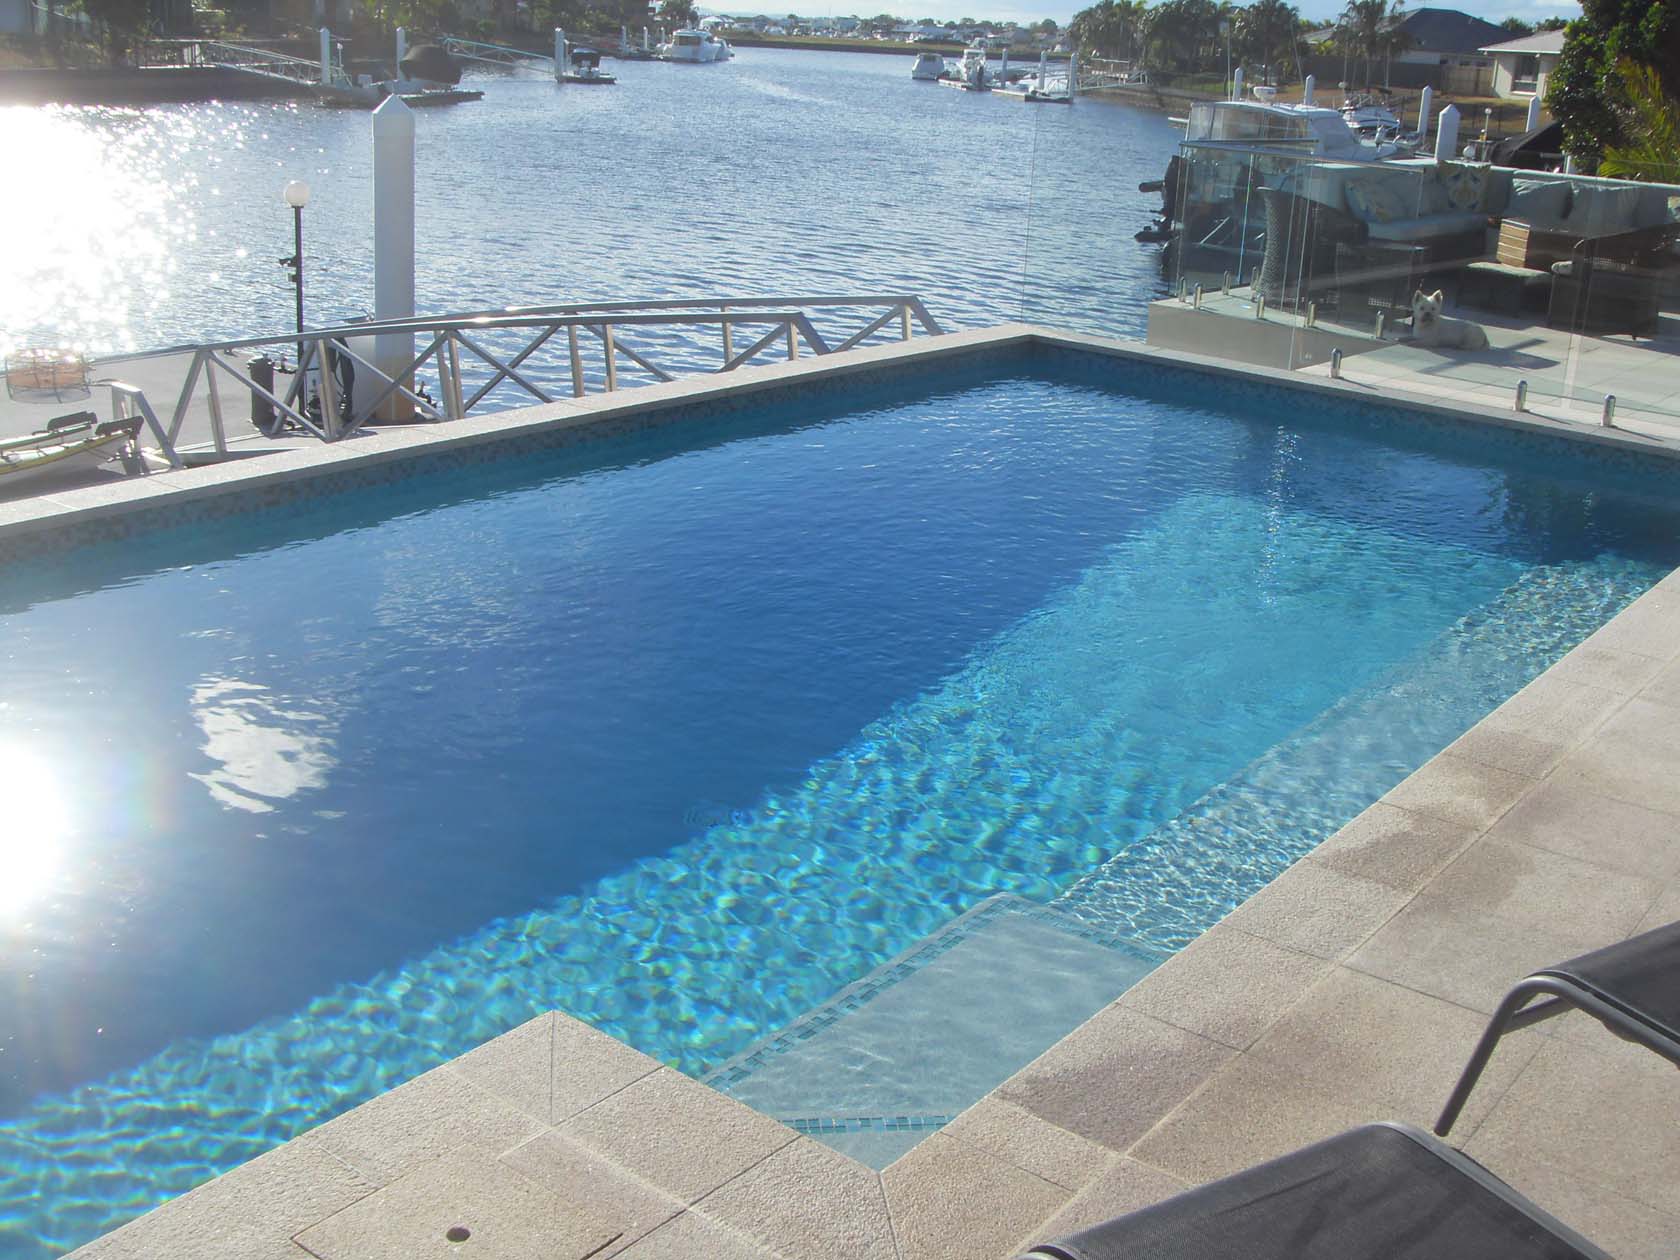 Mushroom Granite natural stone pool coping and surrounds with GCR325 Aqua Crystal Pearl Blend waterline tiles